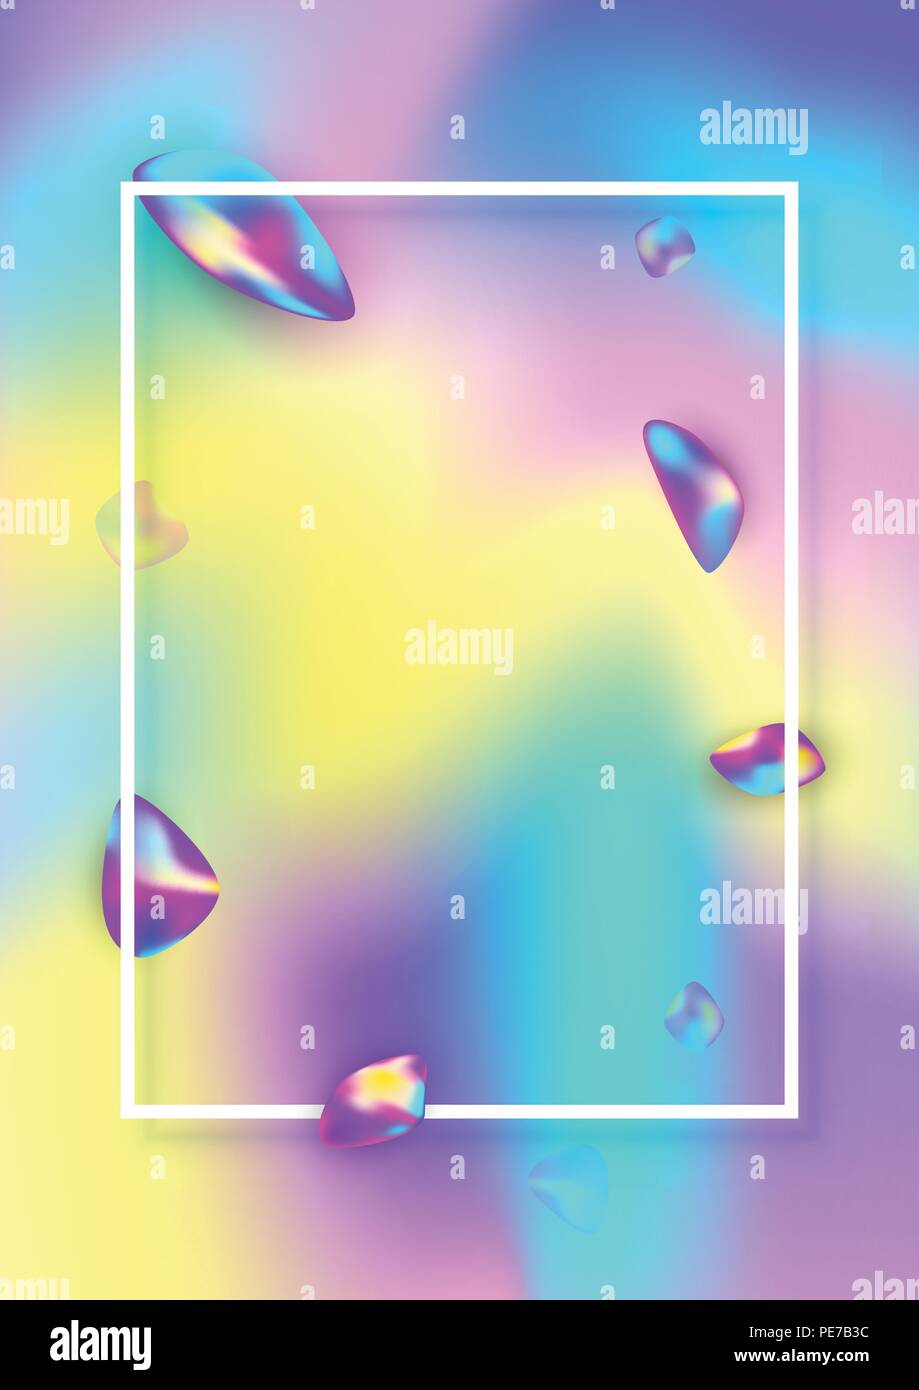 Vertical Cover For Graphic Design Background With Holographic Foil Effect Vector Illustration Stock Vector Image Art Alamy